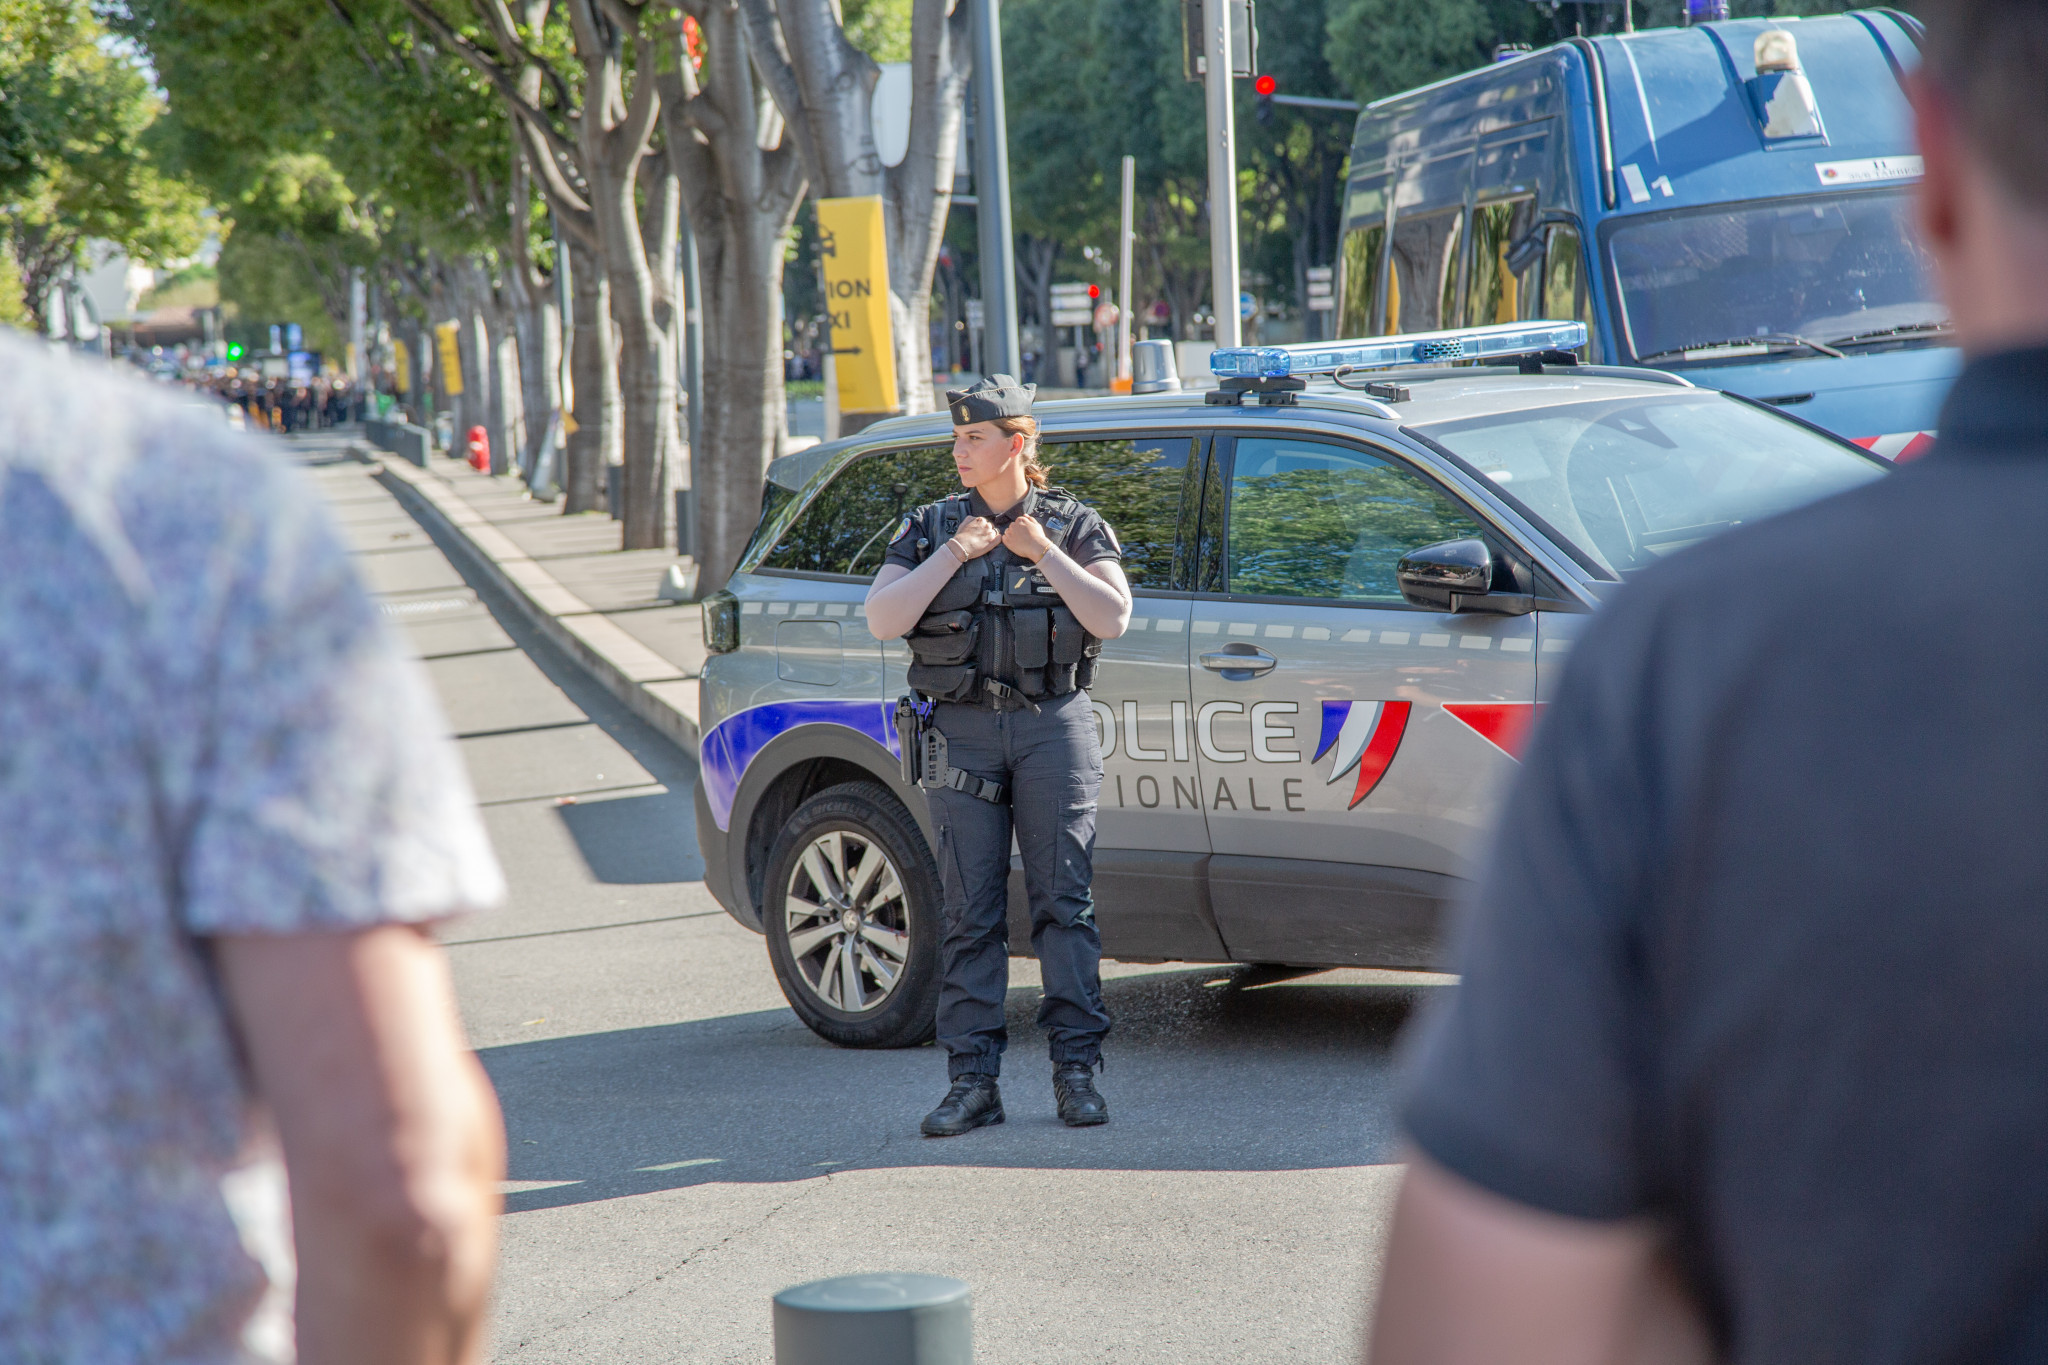 The French police union has revealed strikes could take place. GETTY IMAGES